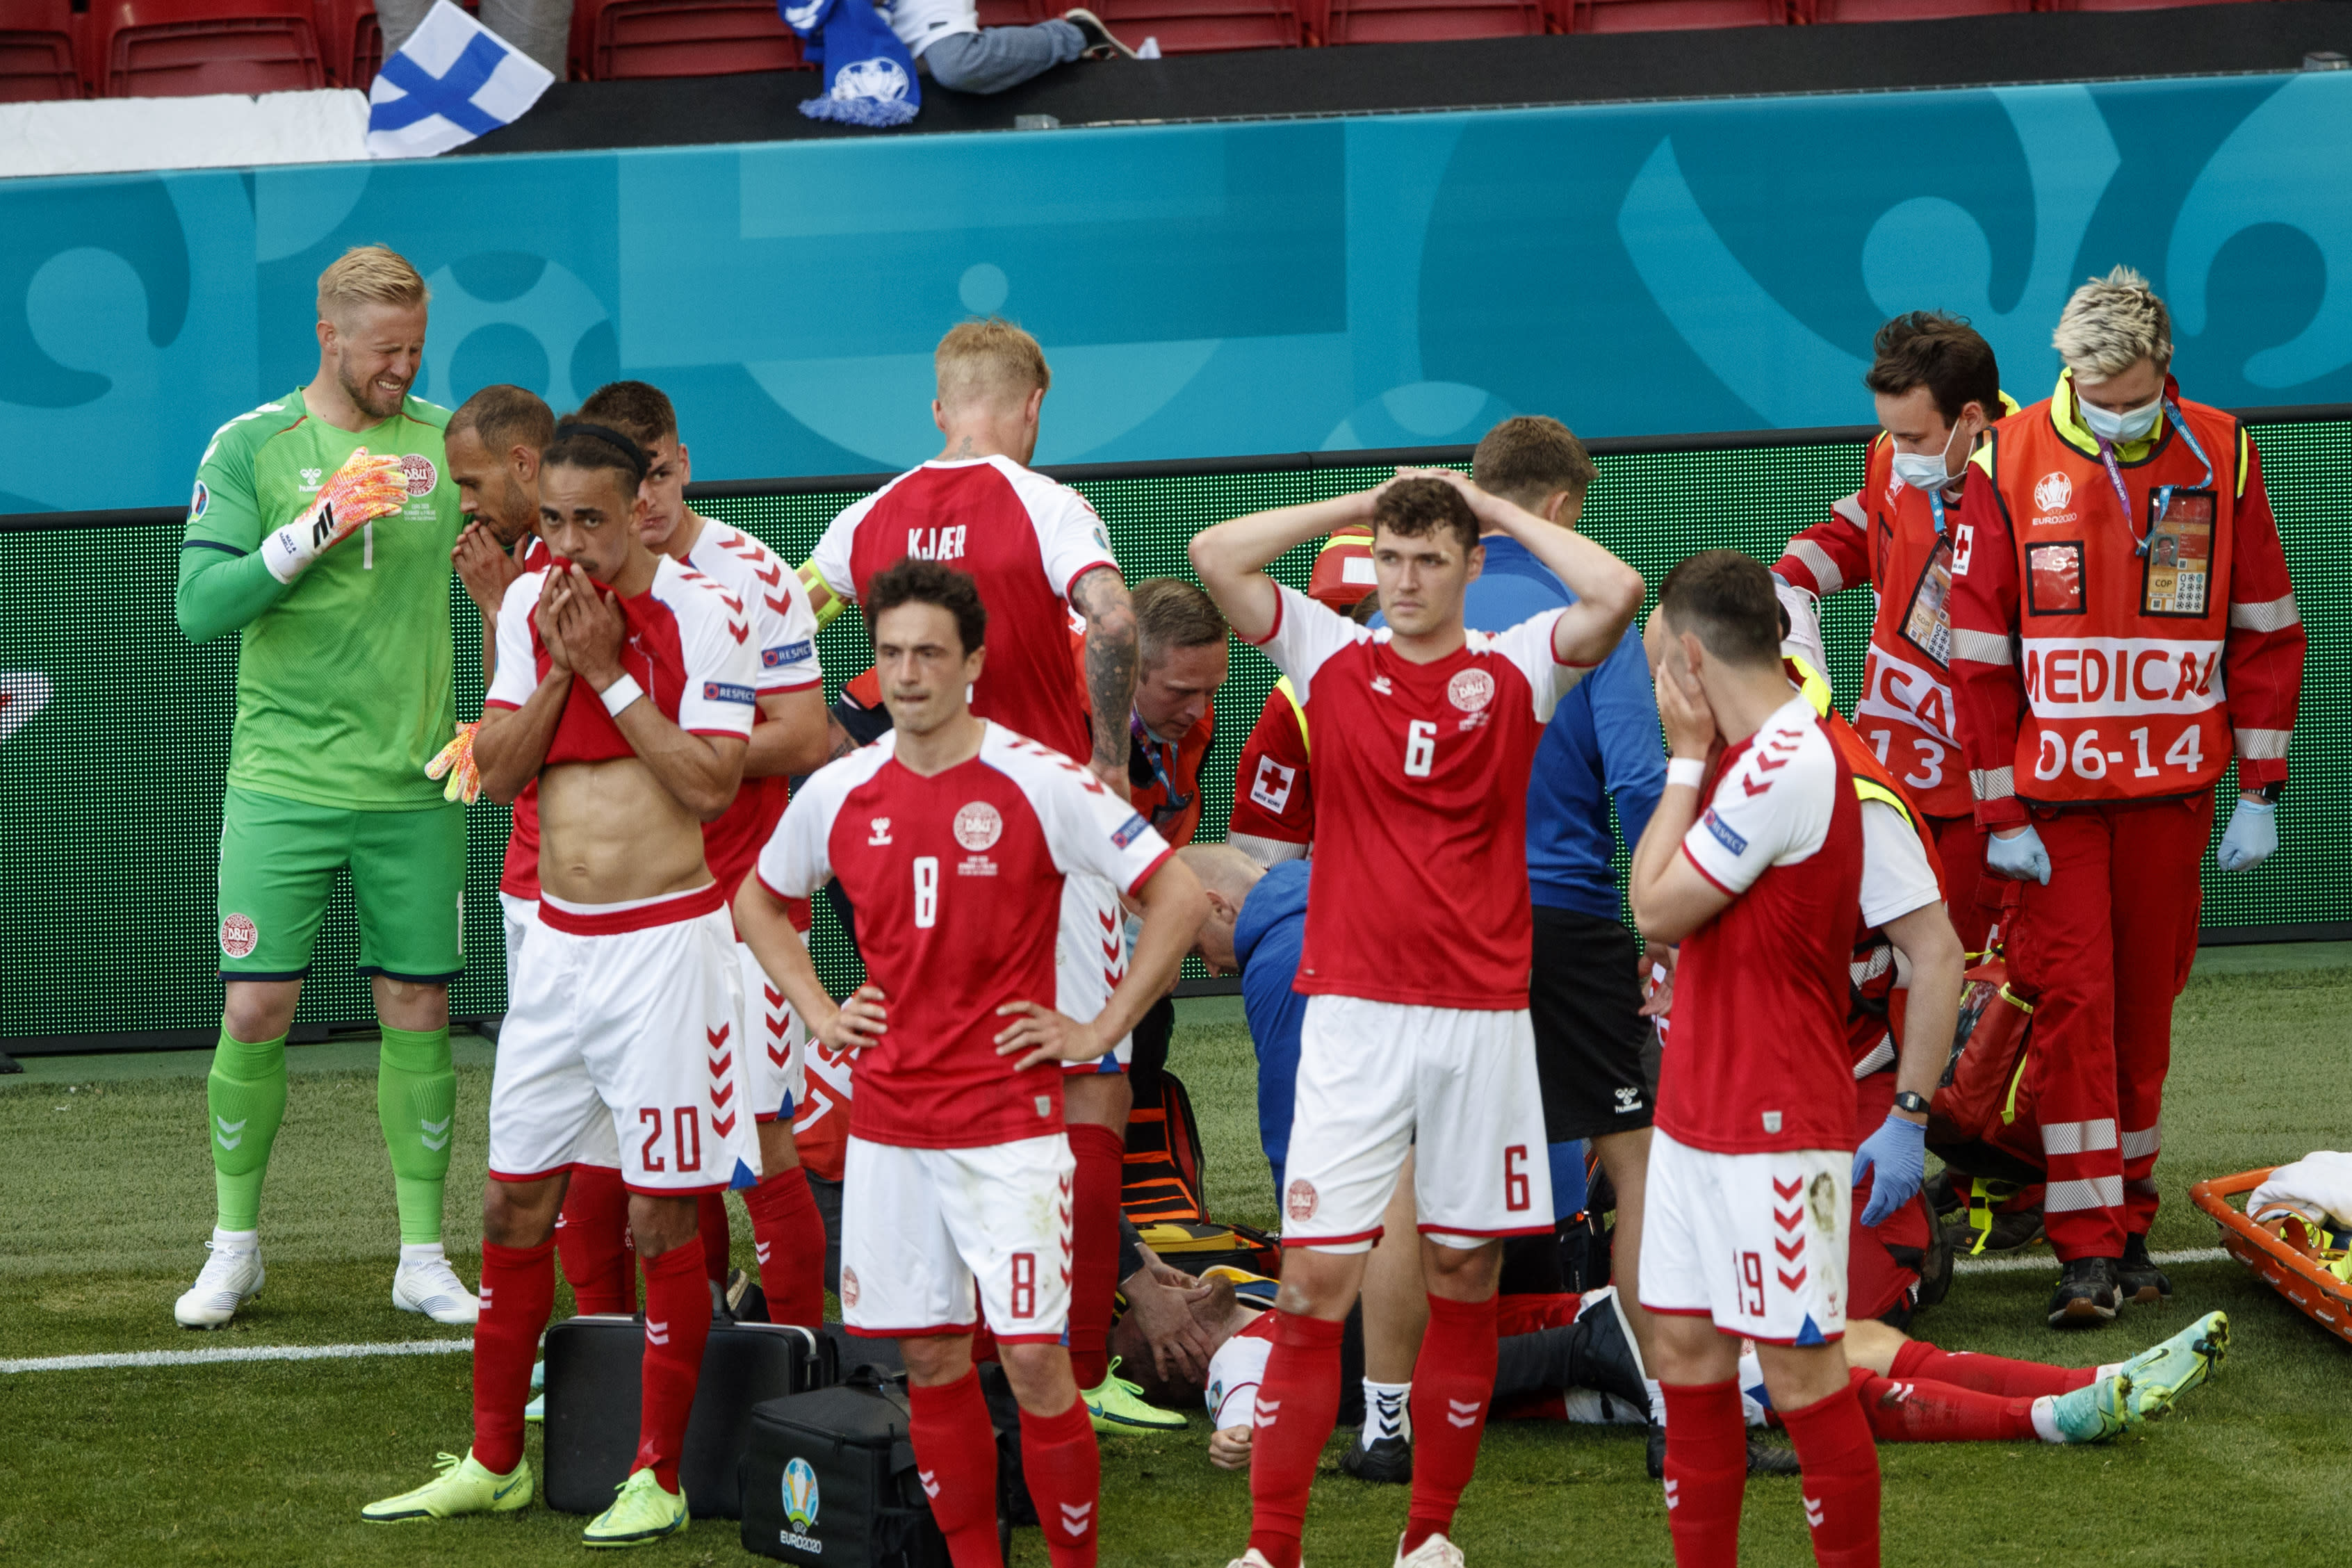 The Finnish FA apologizes "poorly designed" tweeted after fan backlash